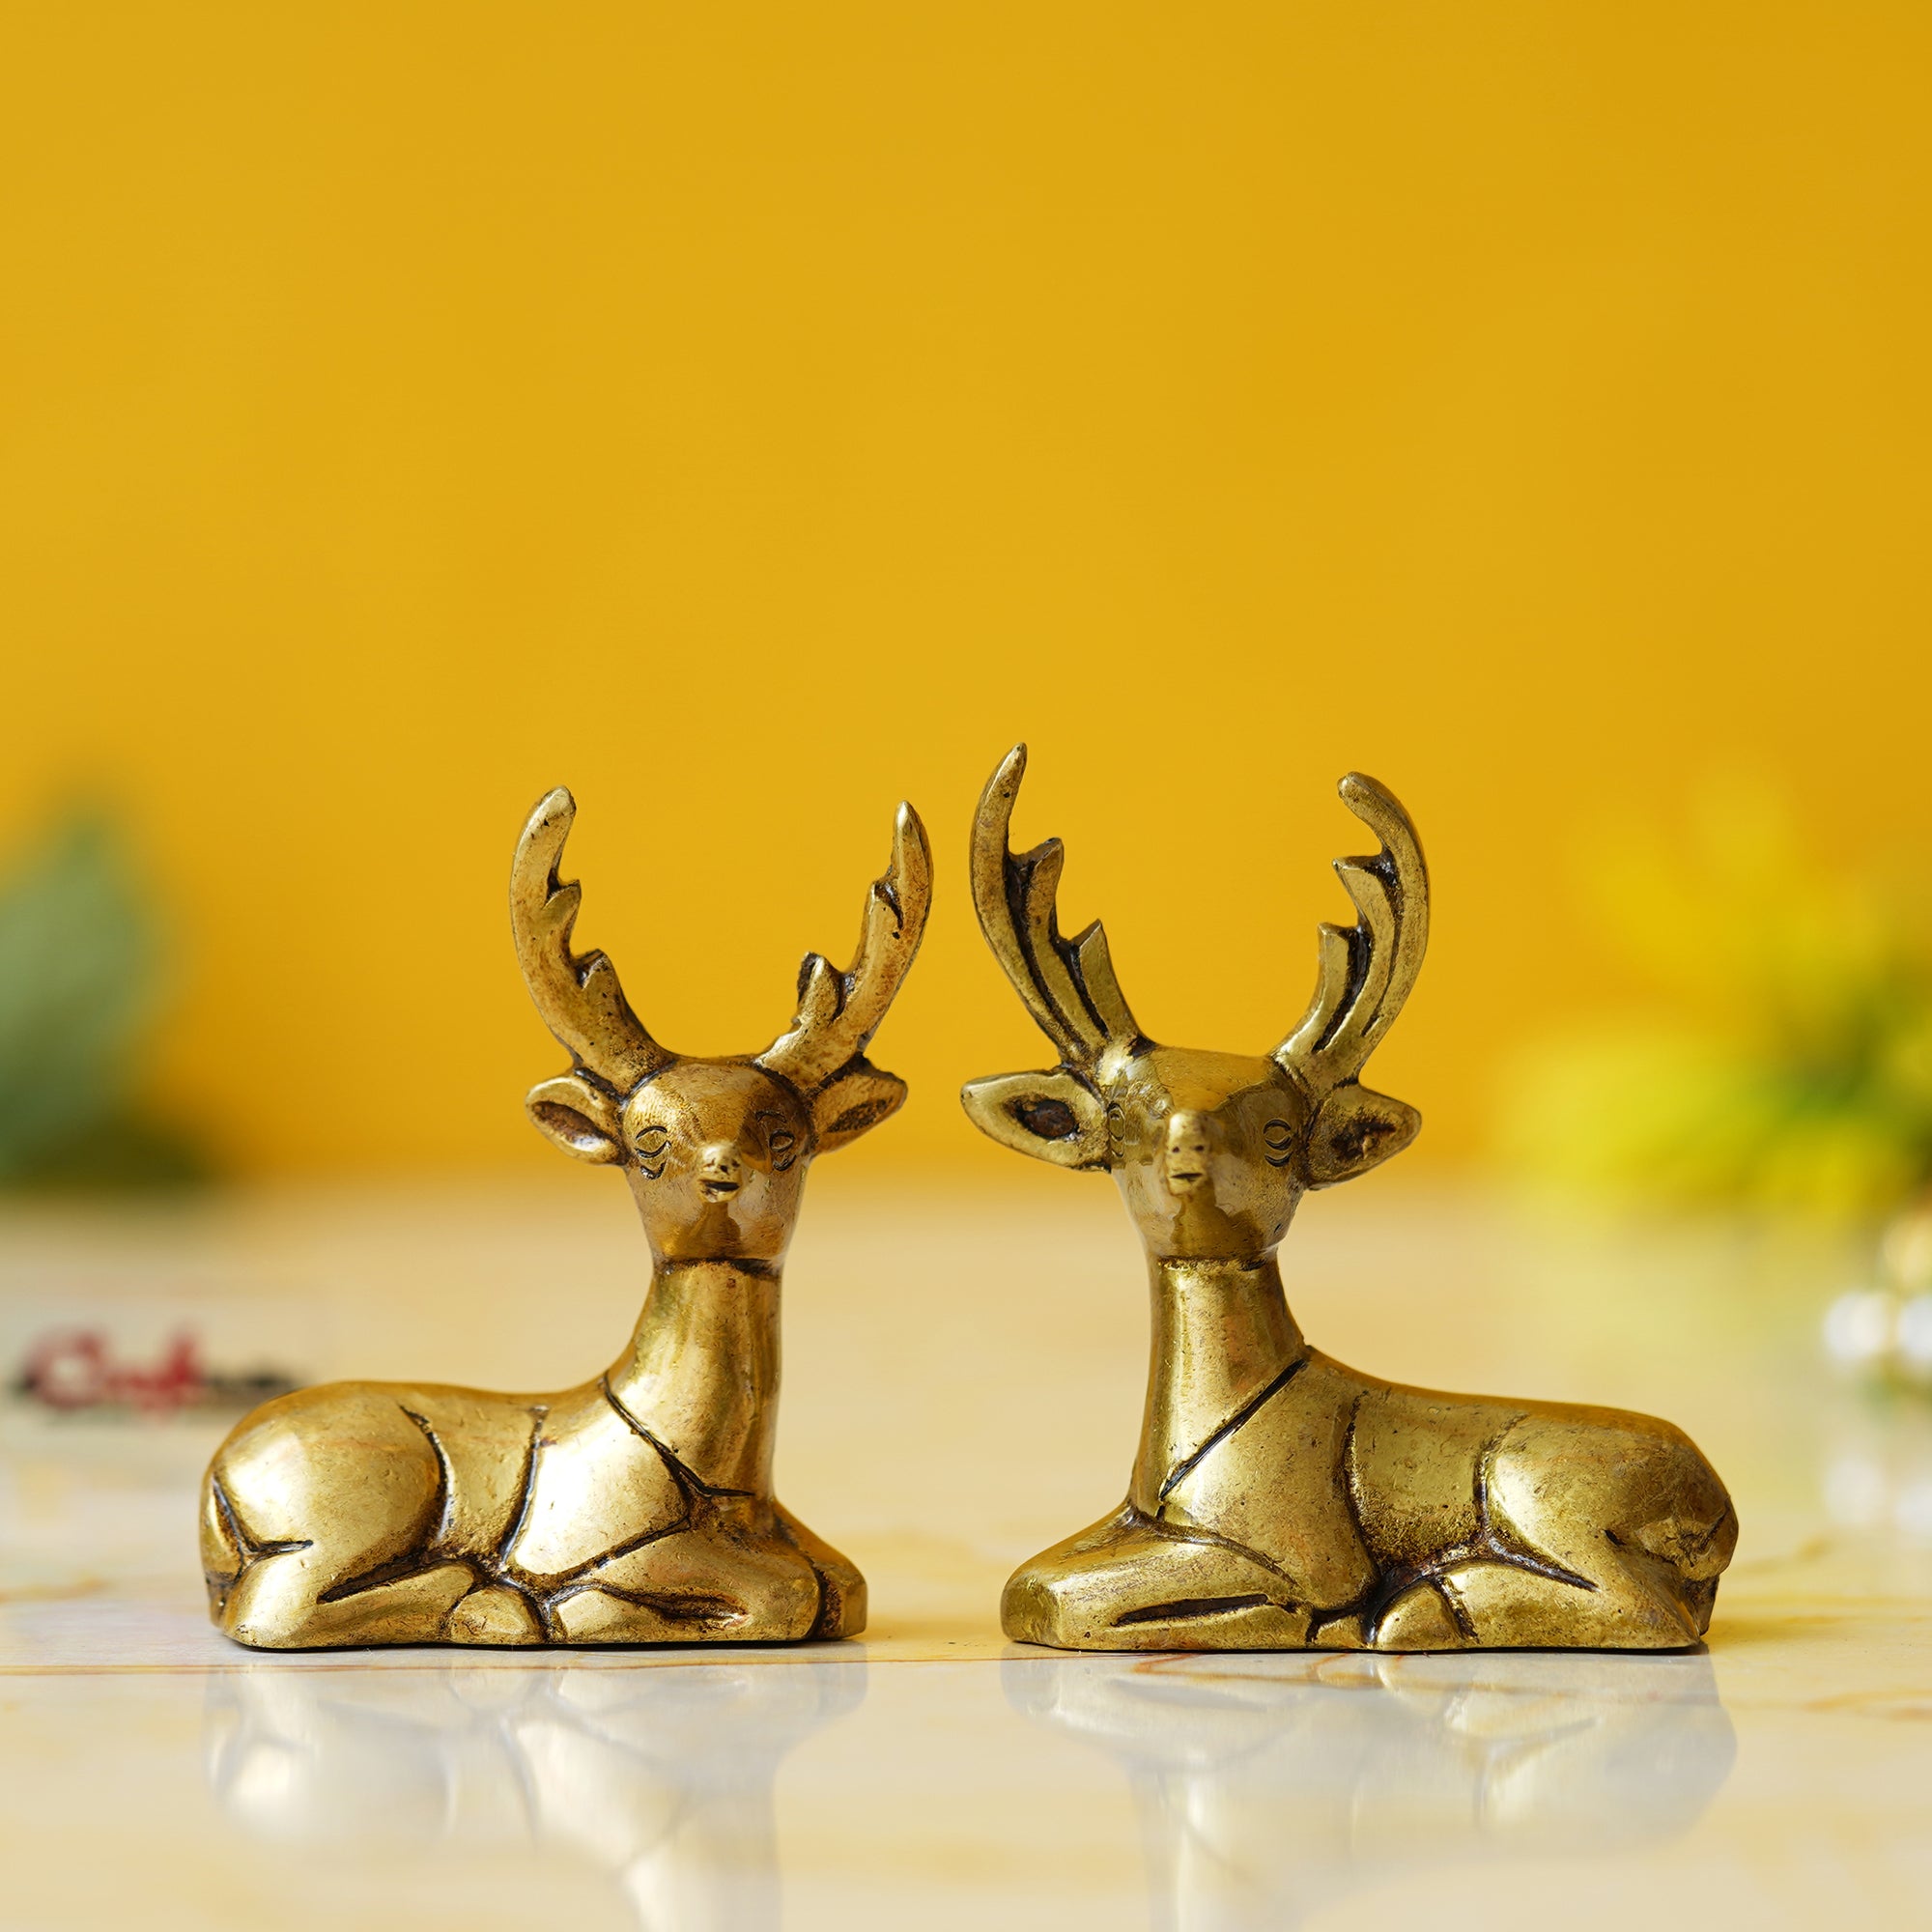 Set of 2 Golden Brass Deer Statues Showpieces - Animal Figurines for Home Decoration - Gift for Christmas, Winter Festivities, and Holiday Celebrations 4